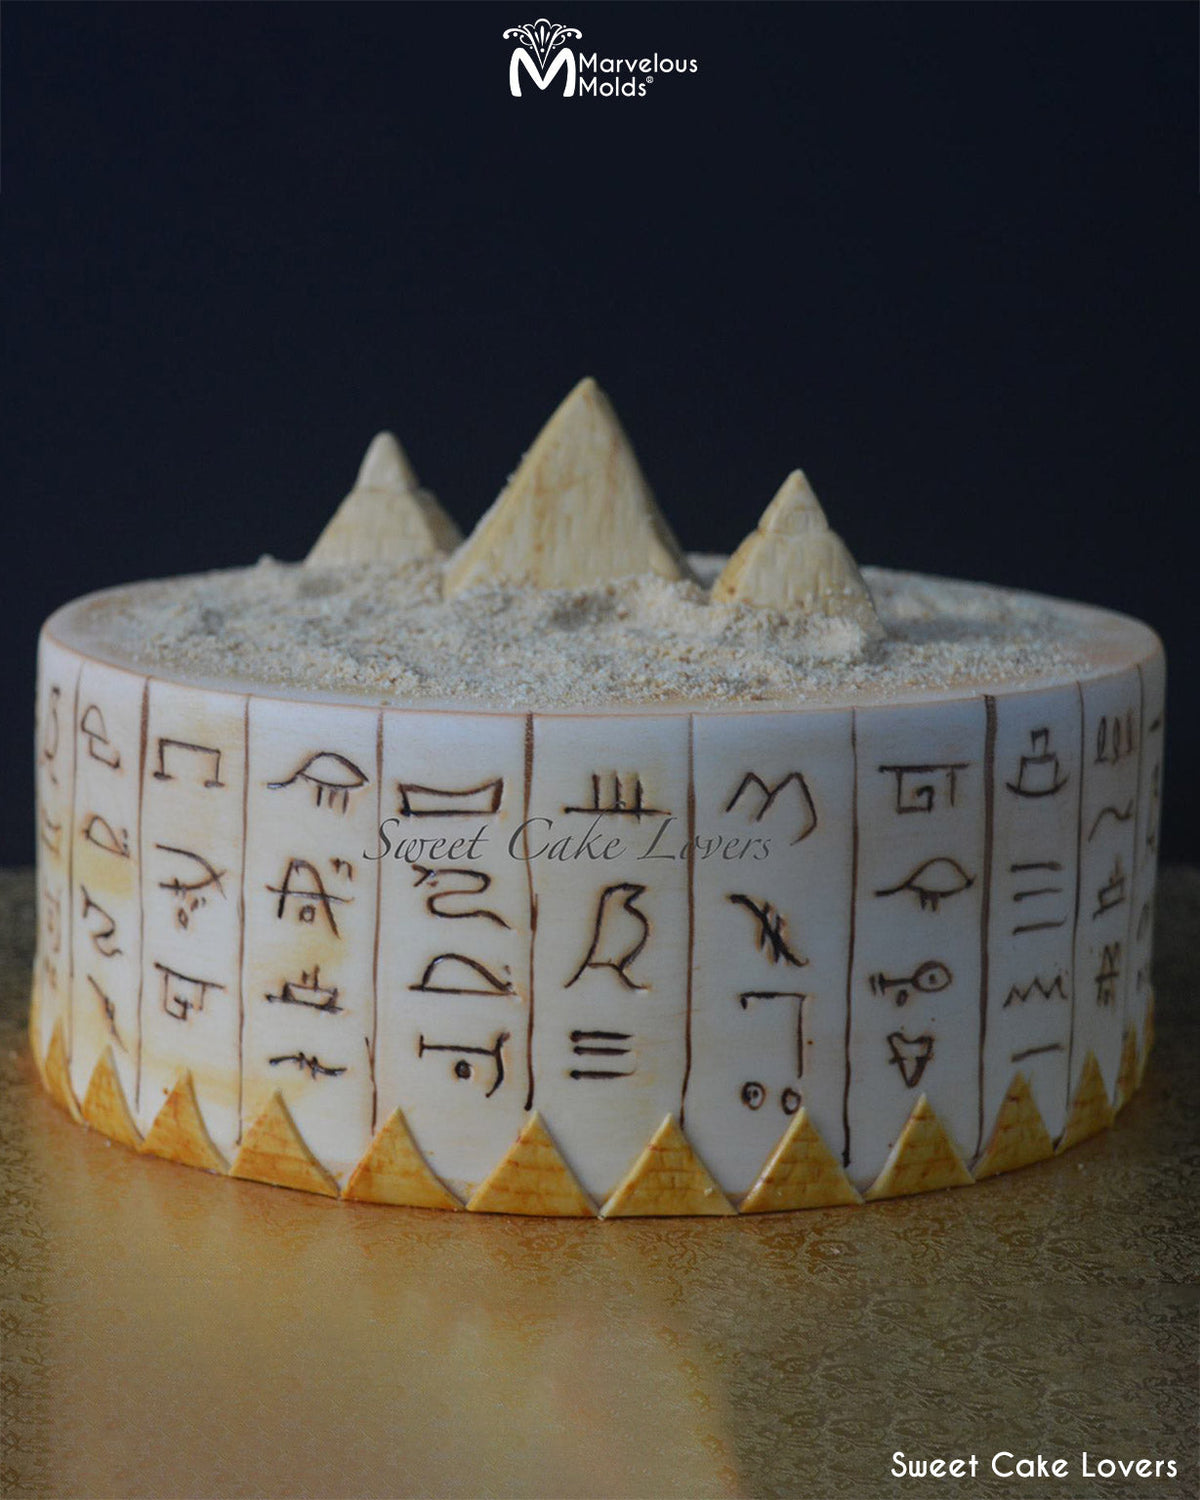 Egyptian Pyramid Cake with Hieroglyphics, Decorated Using the Simply Triangles Silicone Onlay Cake Stencil by Marvelous Molds